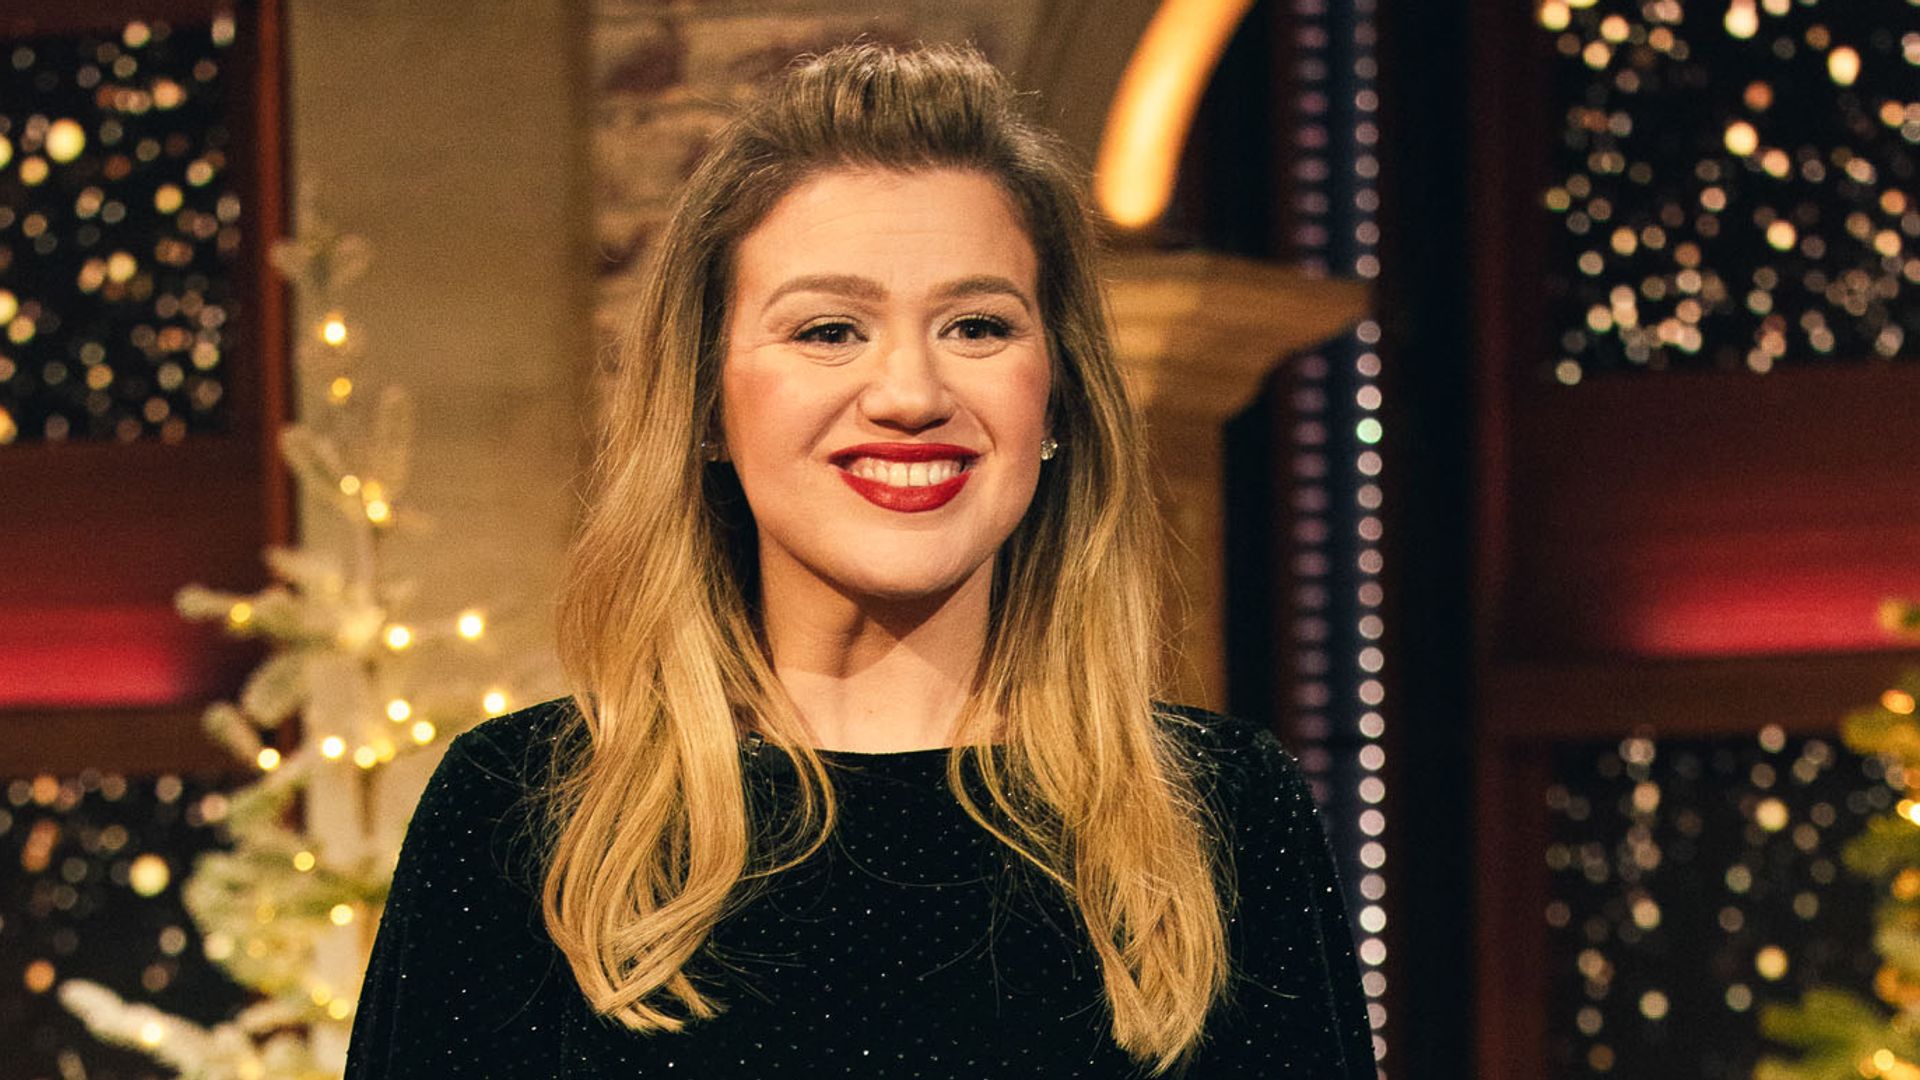 Kelly Clarkson highlights tiny waist in plunging outfit that